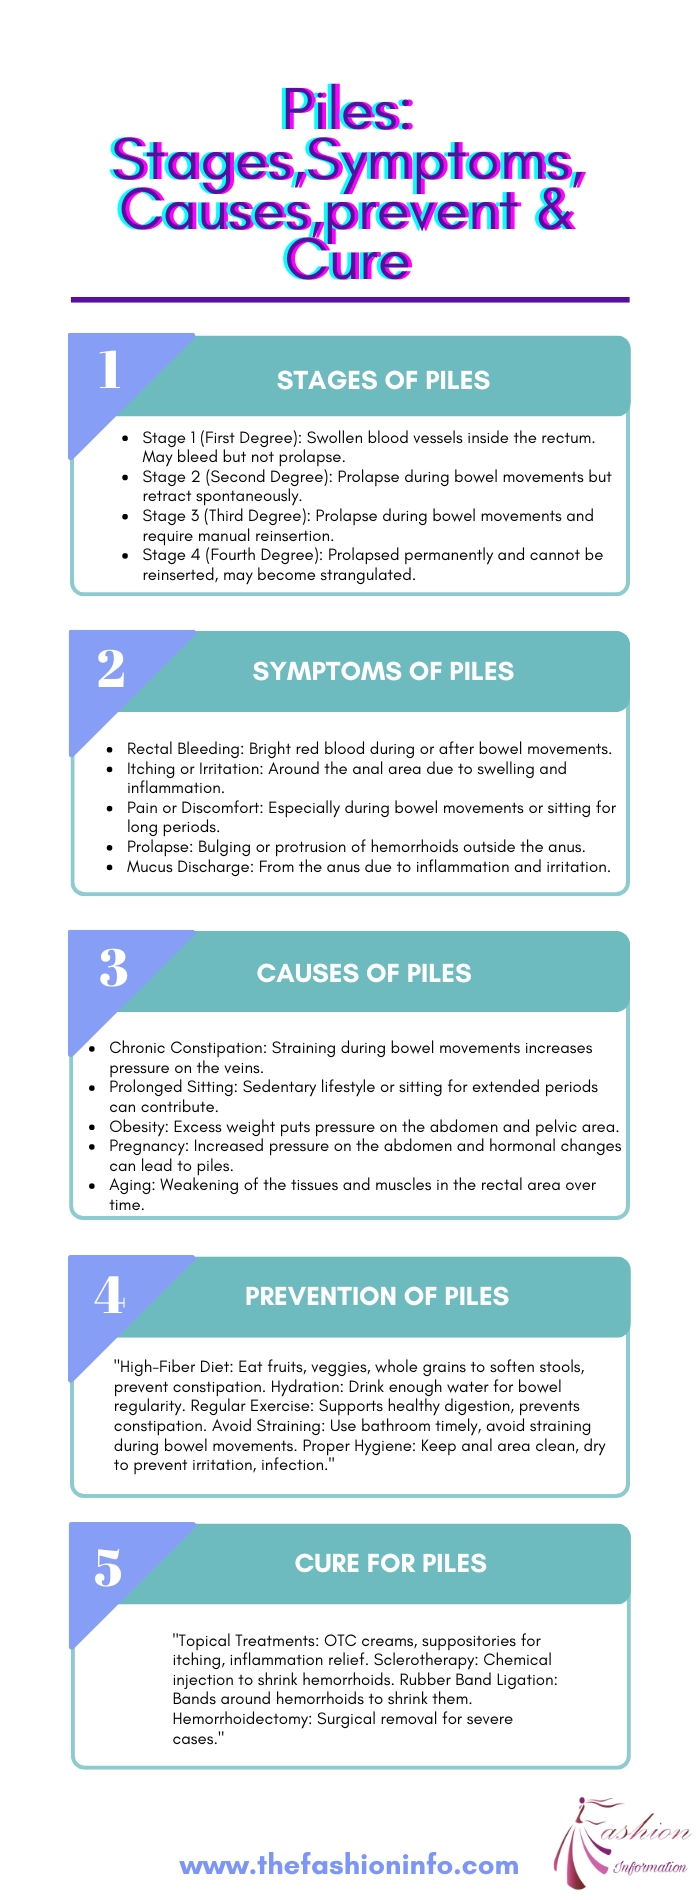 Piles Stages,Symptoms,Causes,prevent & Cure